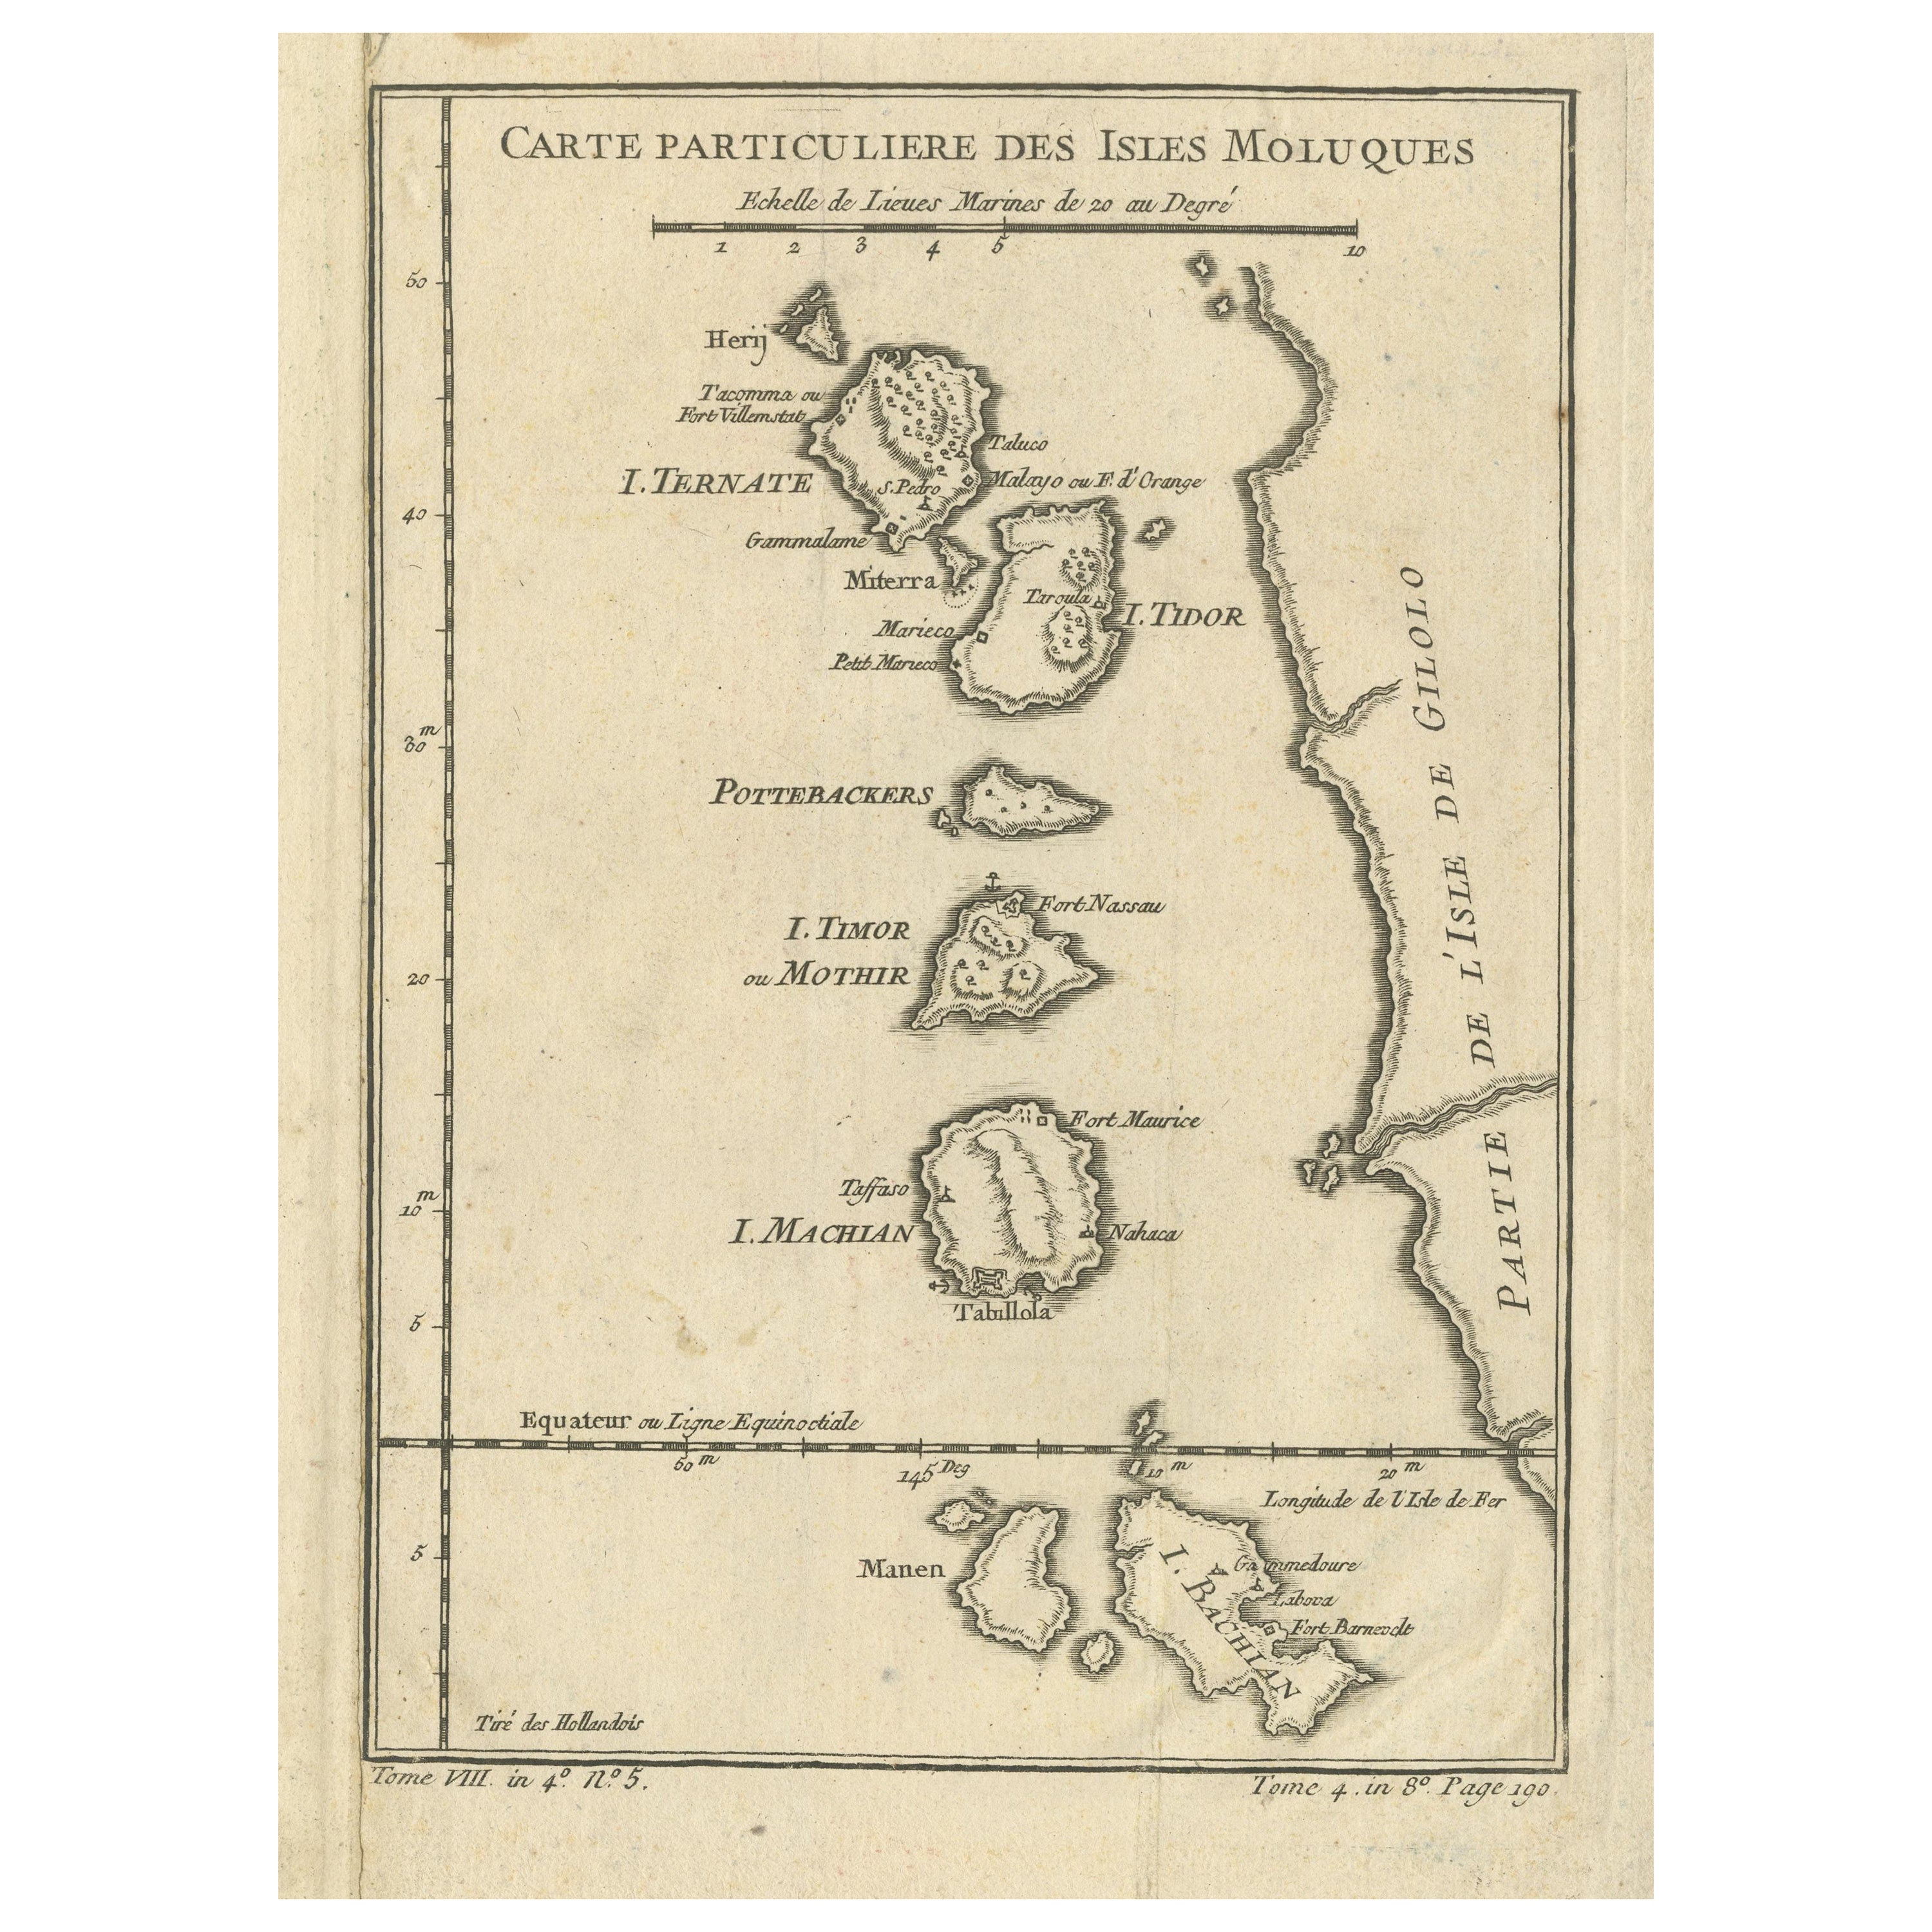 Antique Map of the Maluku Islands or Moluccas, Indonesia